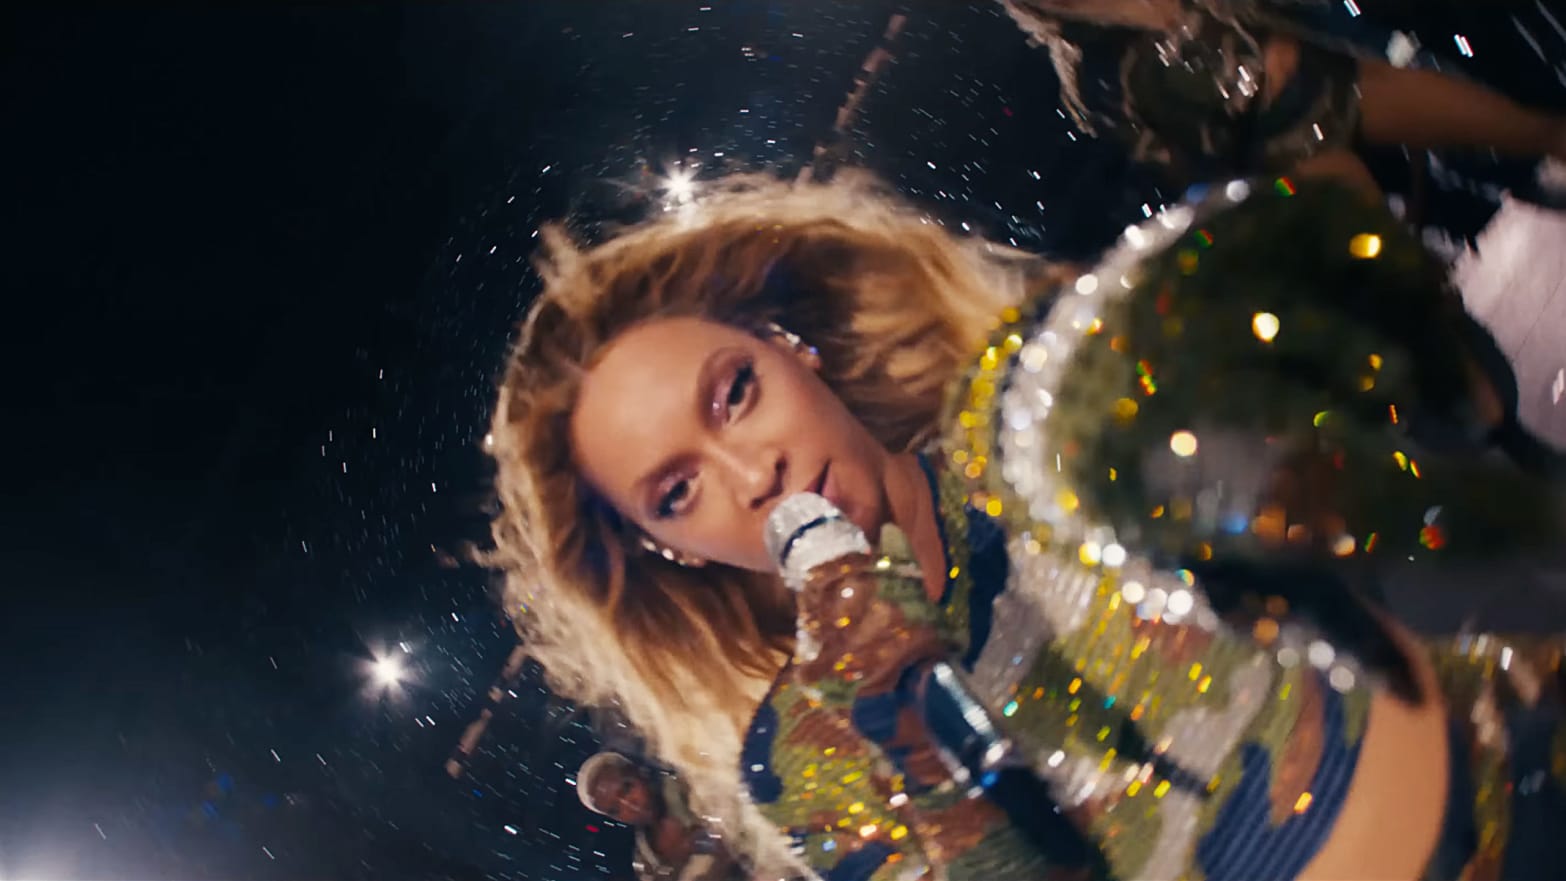 A still from the Beyonce film Renaissance showing Beyonce performing.